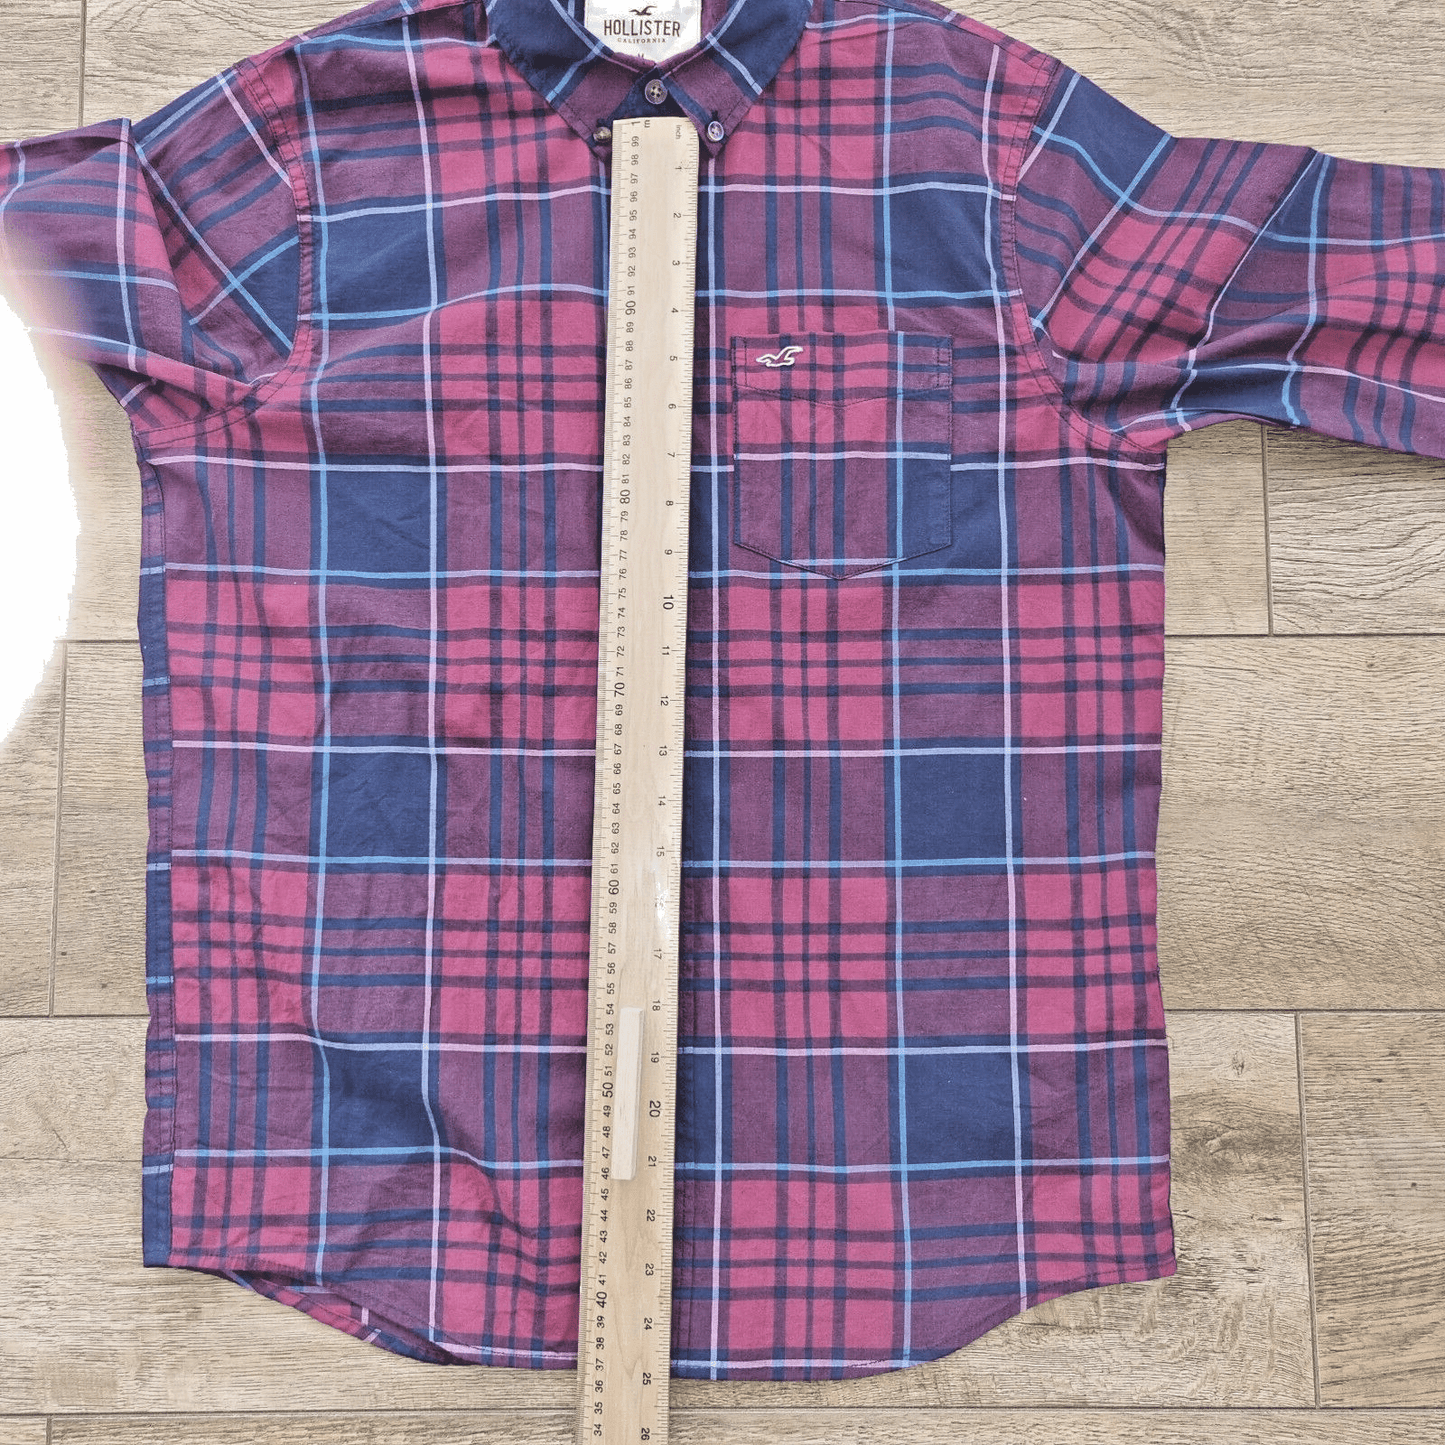 Hollister Wine Red Plaid Muscle Fit Stretch Button Down Shirt